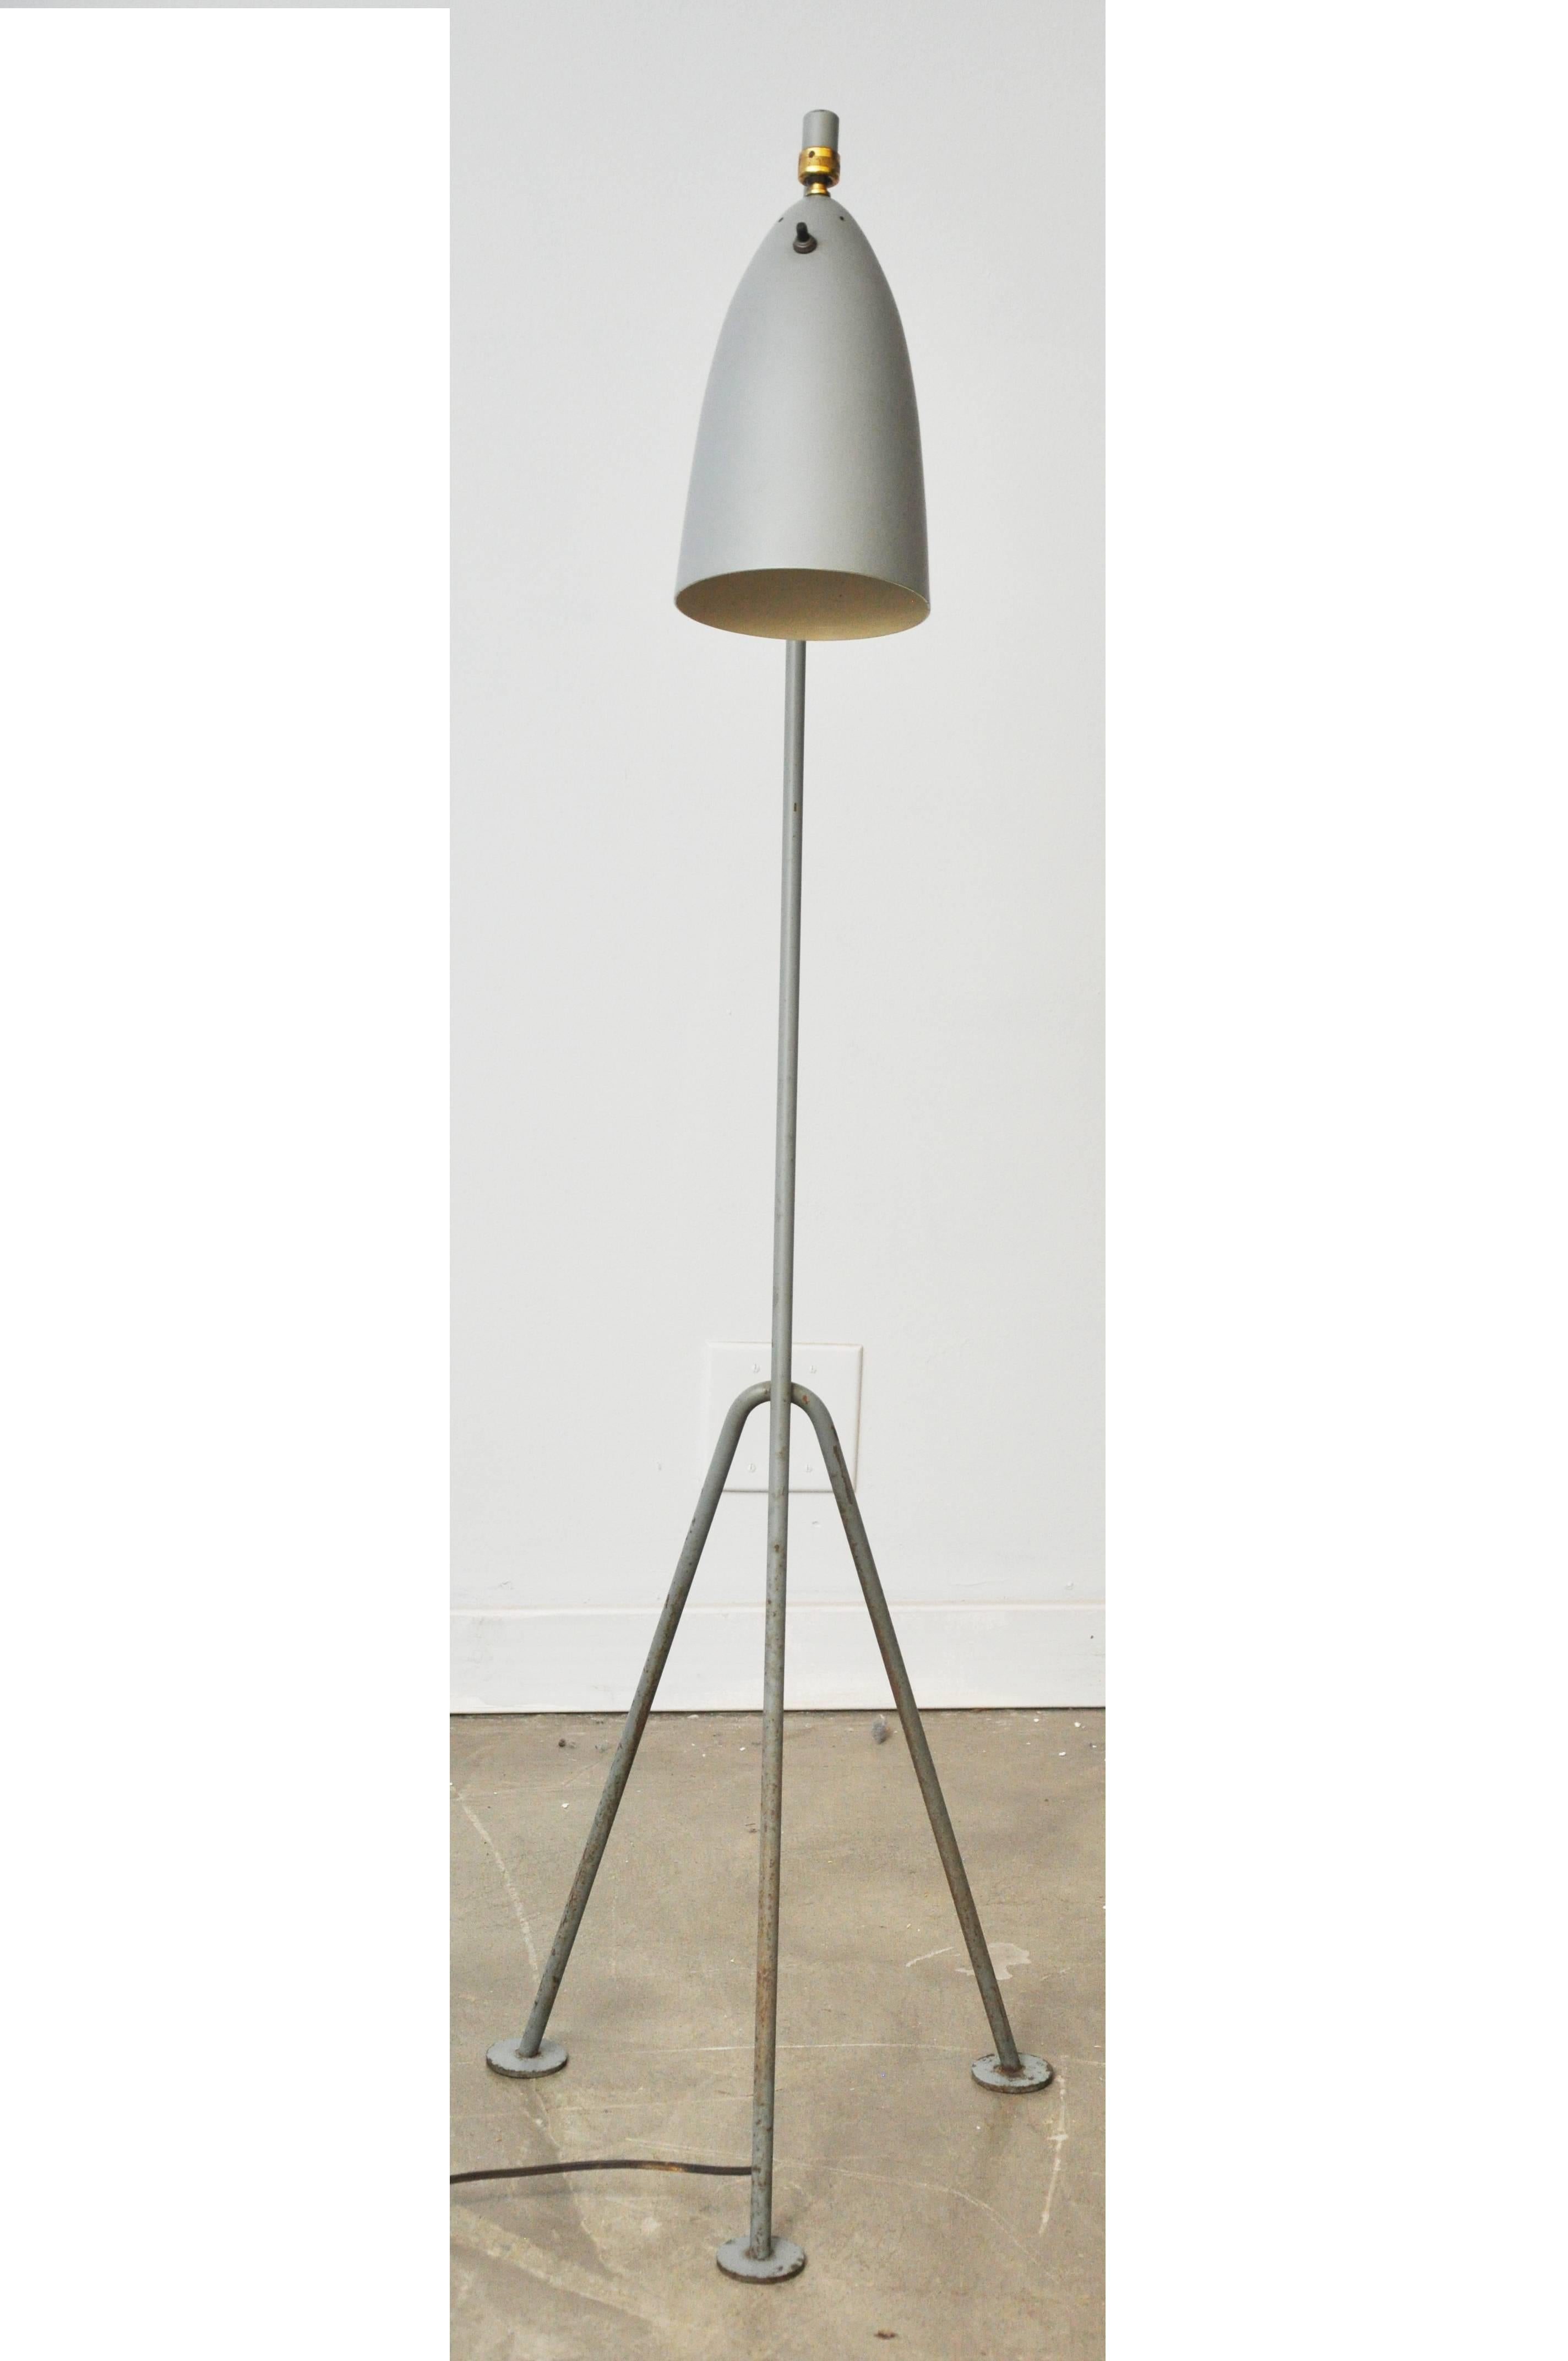 Greta M. Grossman for Ralph O. Smith, circa 1947. Lamp has original fog grey enamel with nice patina/signs of age. Lamp has now been rewired and ready for daily use.